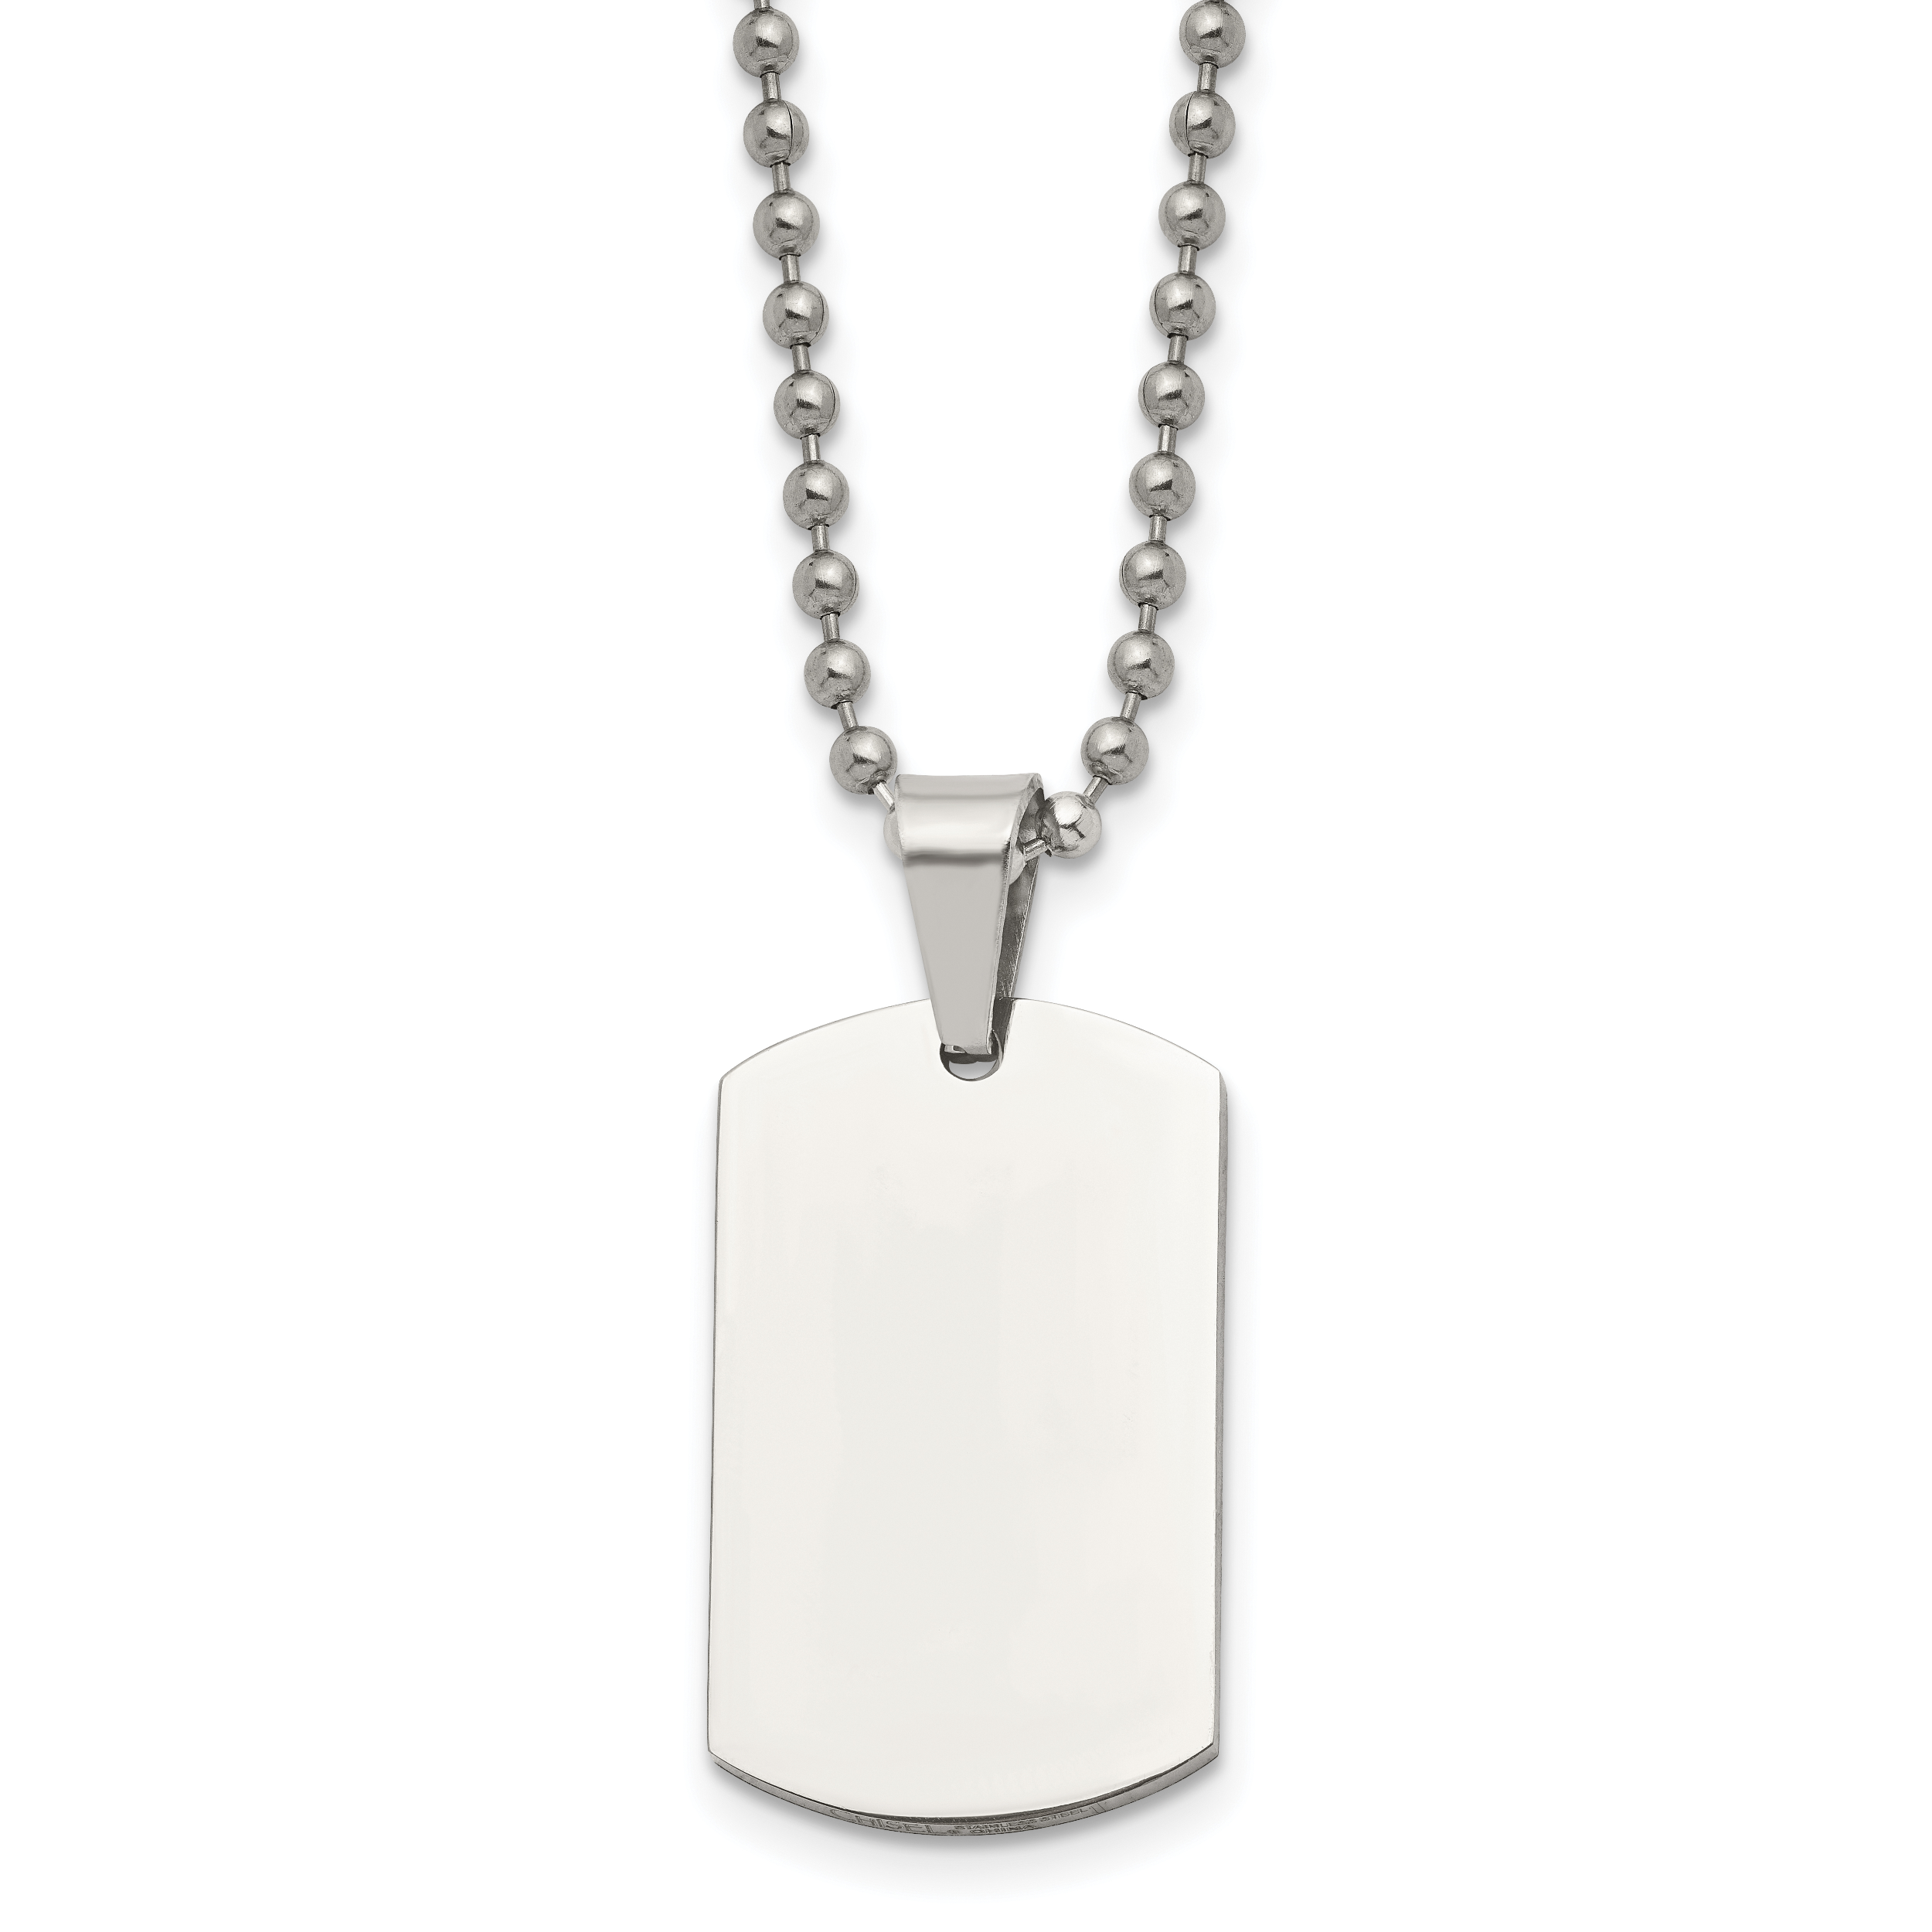 Single Dog Tag Necklace | Lucleon | 365 day return policy